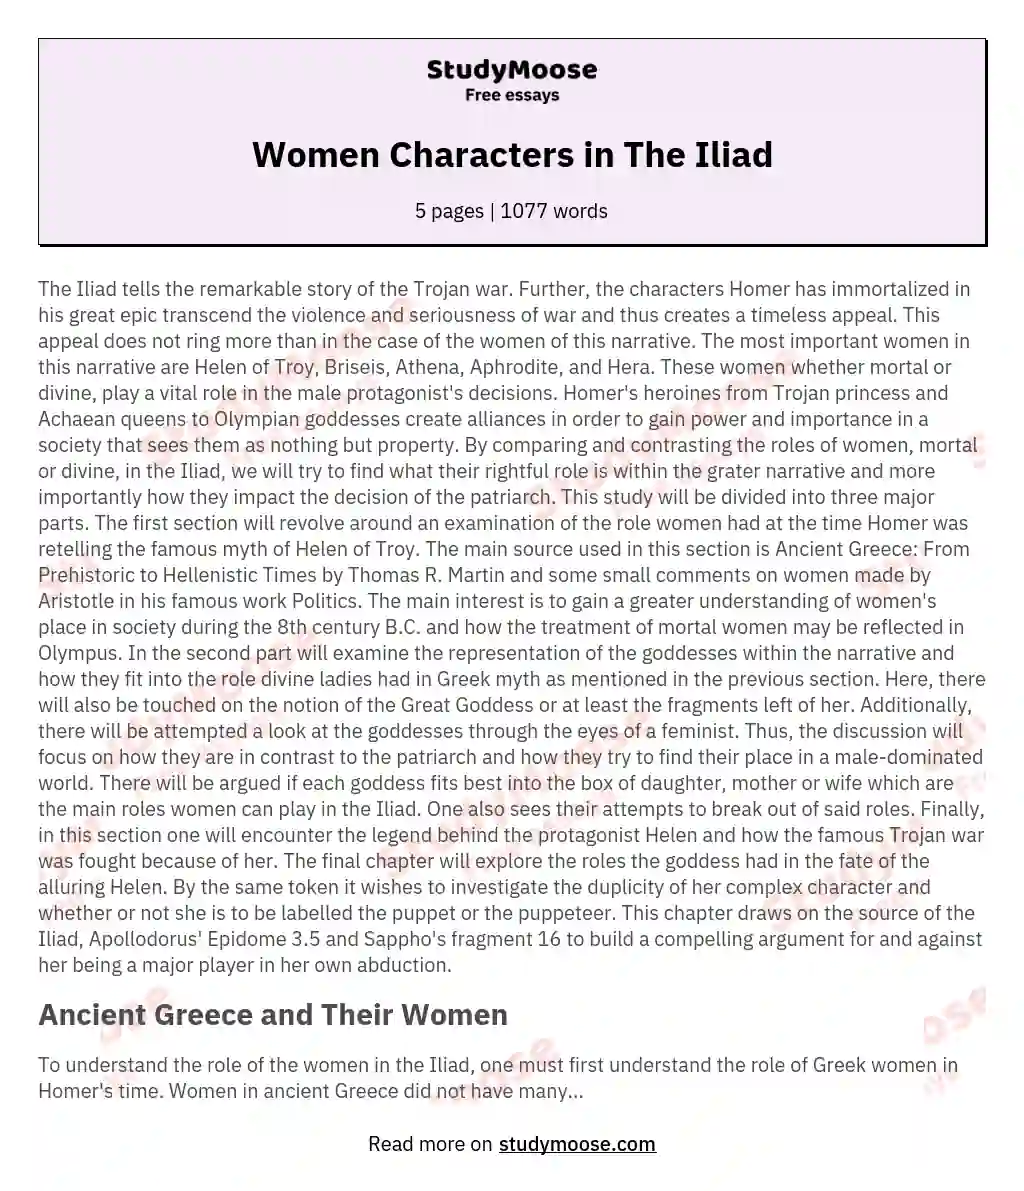 Women Characters in The Iliad essay